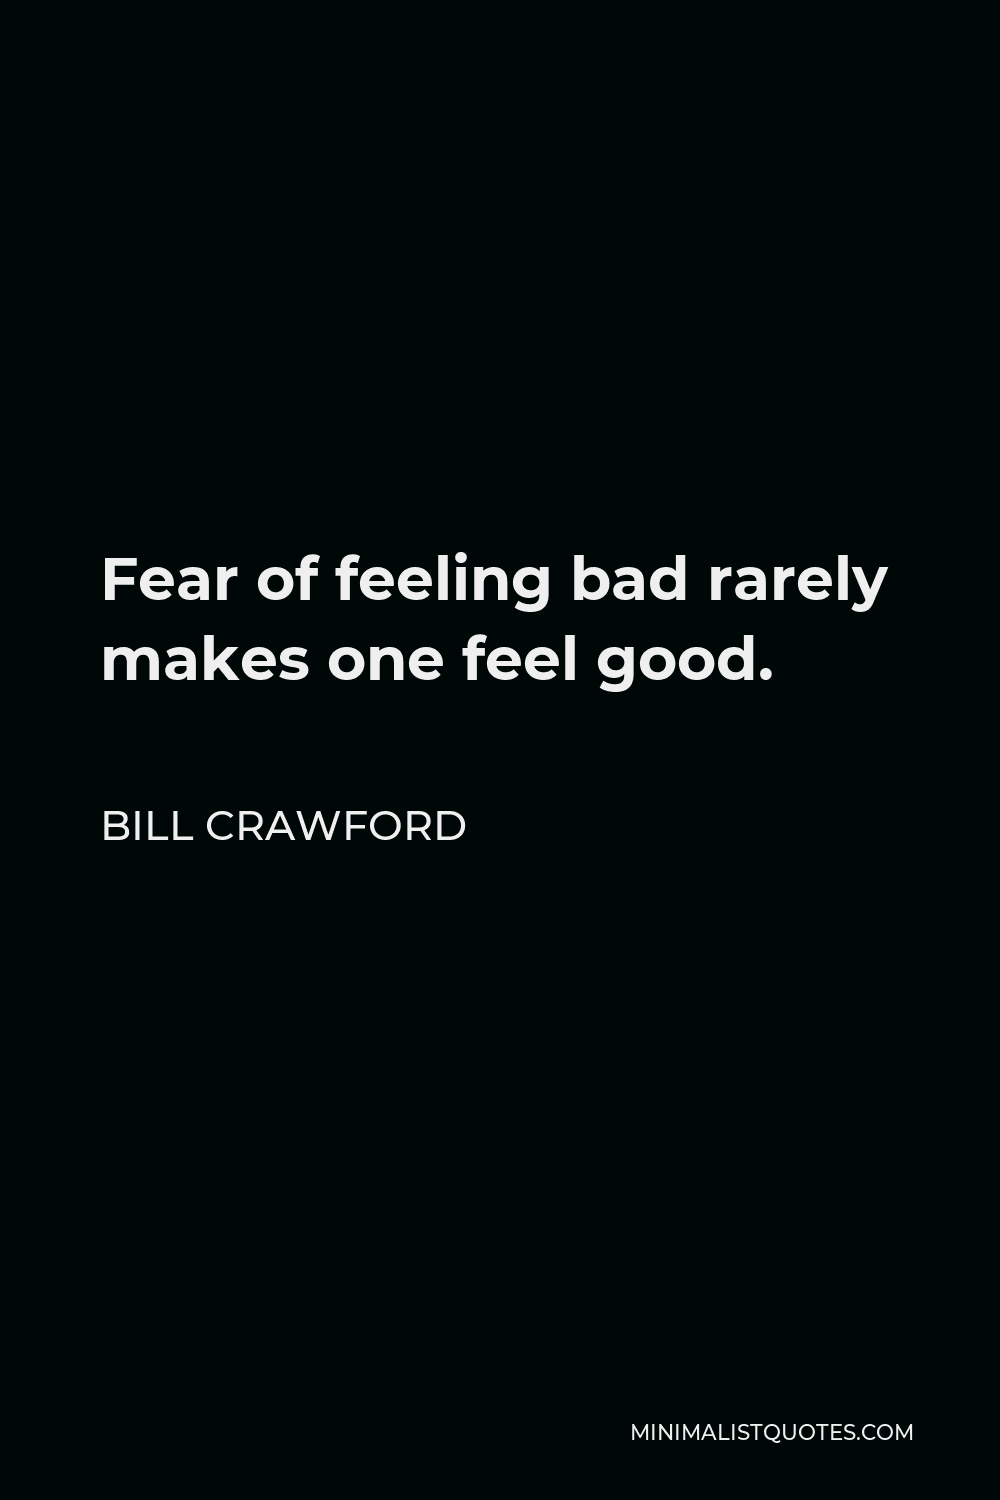 Bill Crawford Quote - Fear of feeling bad rarely makes one feel good.